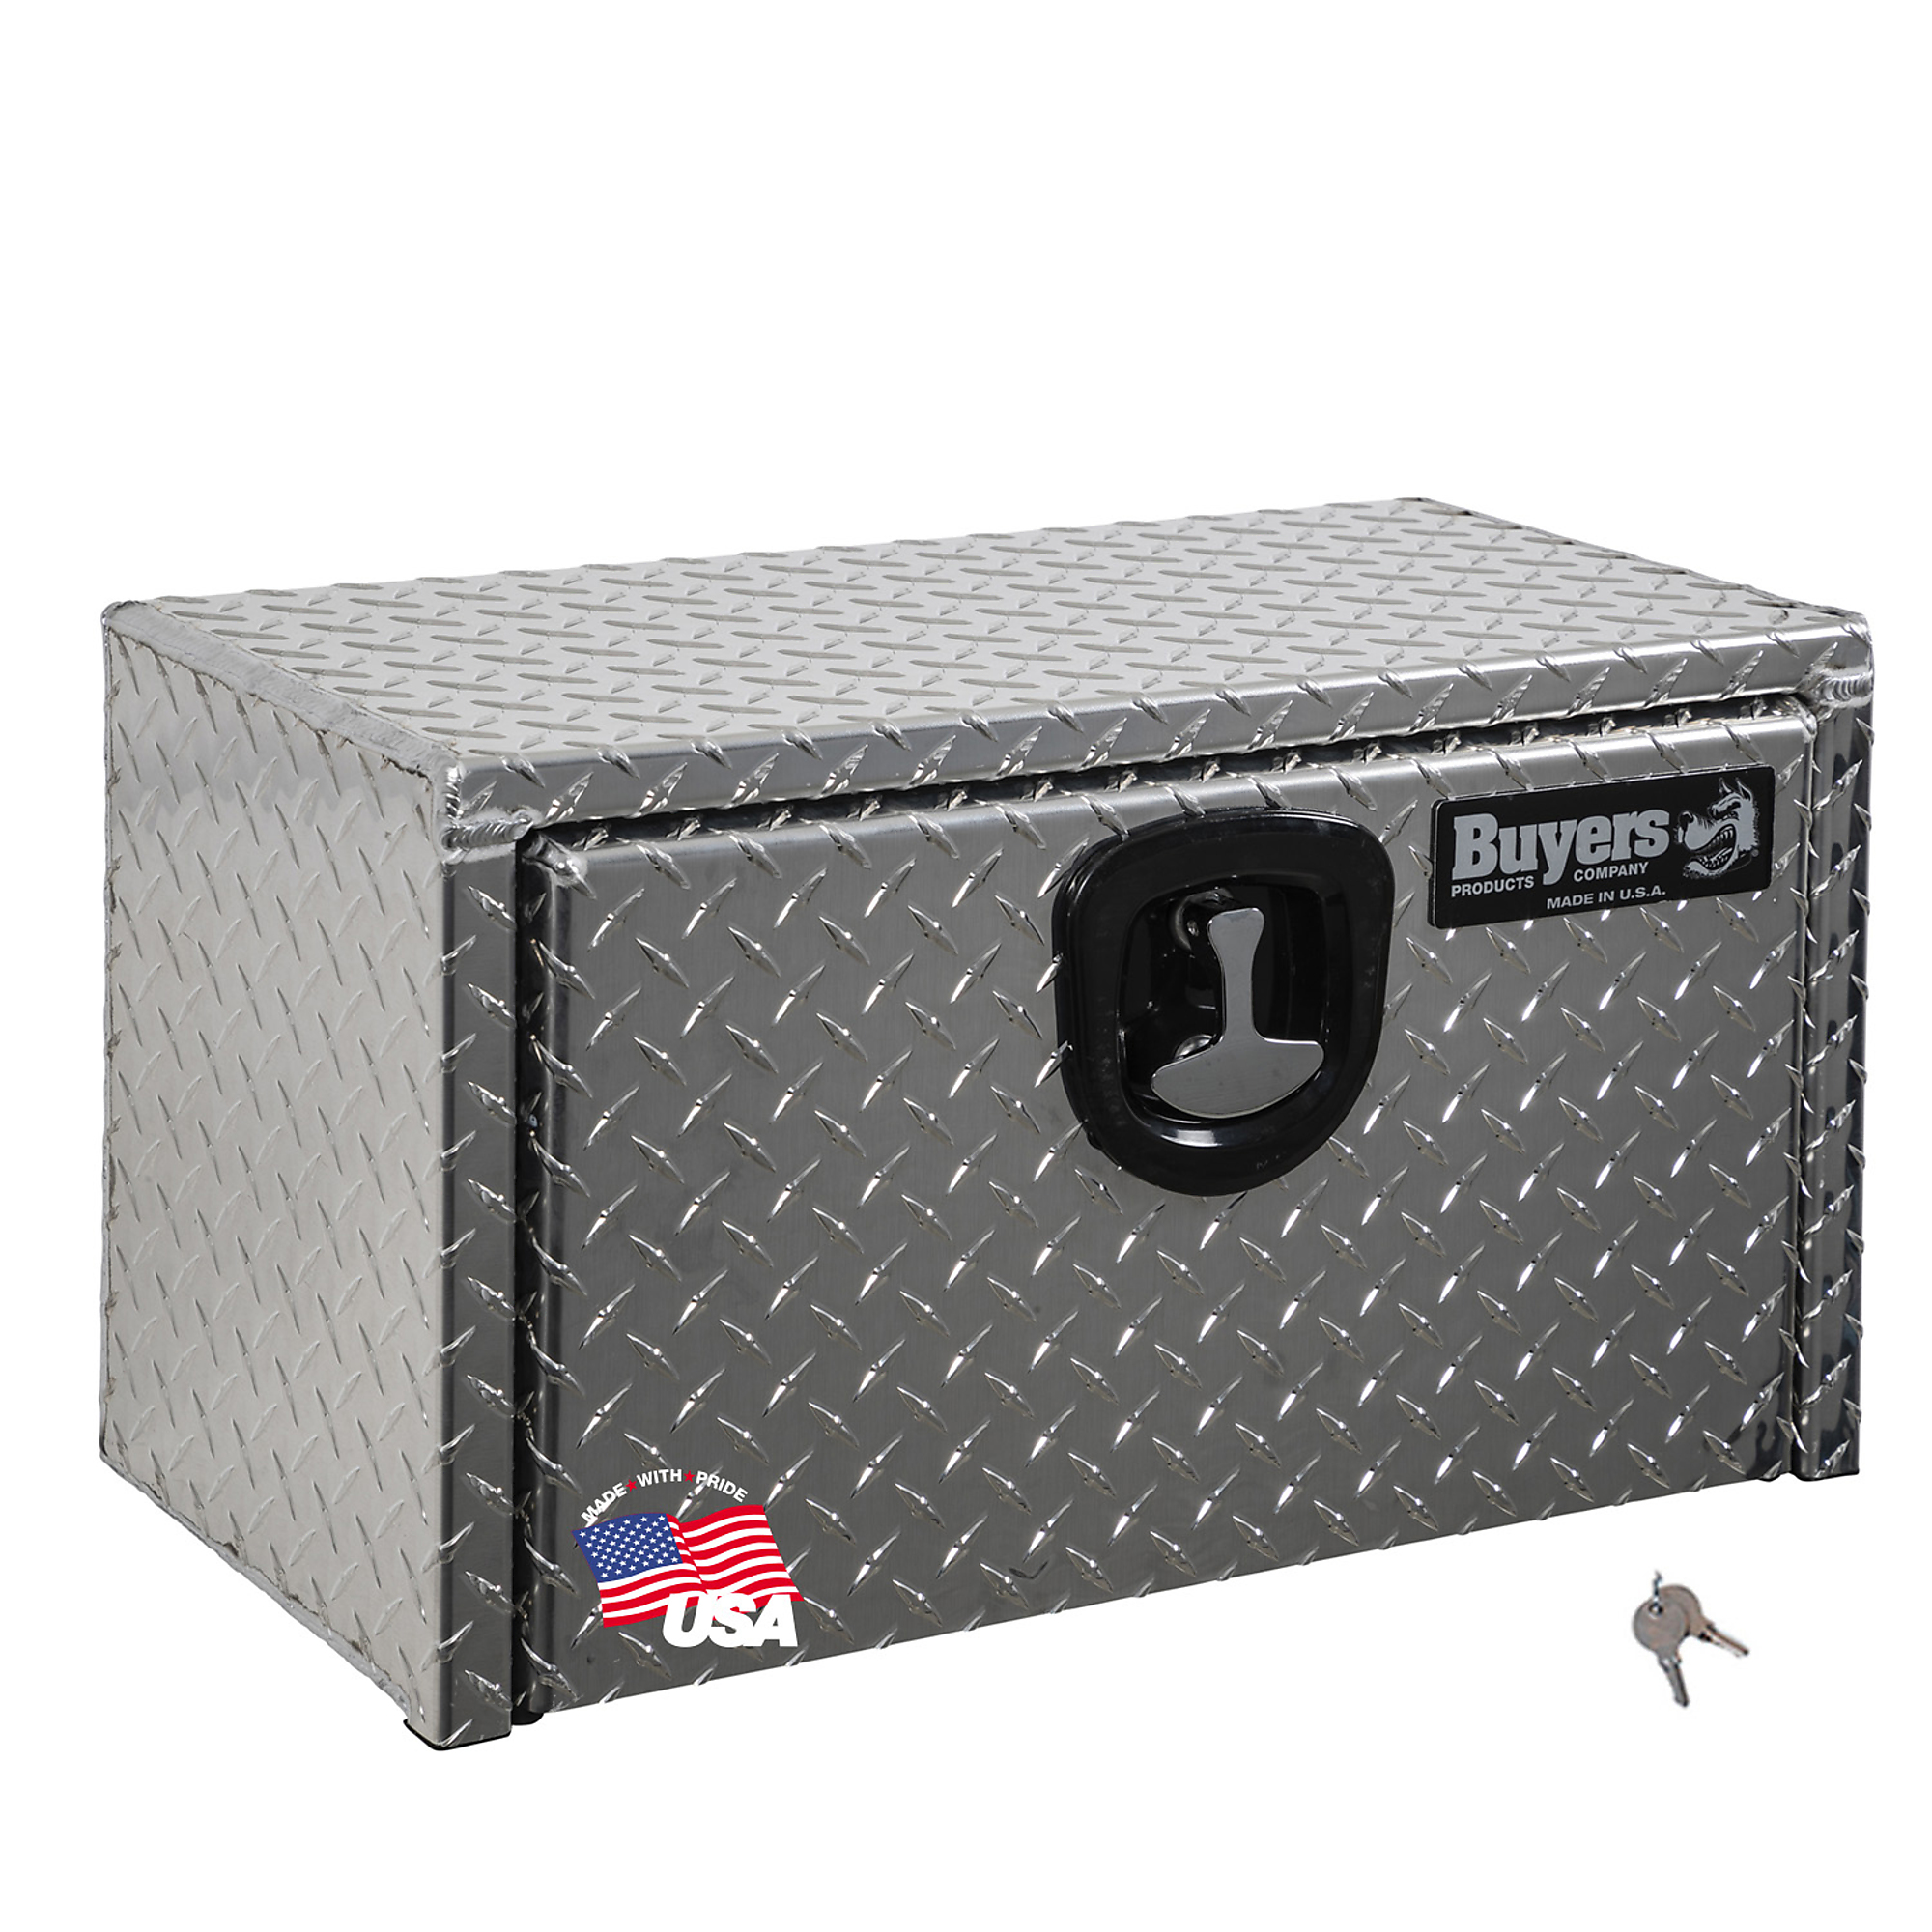 Buyers Products, Underbody Truck Box, Width 24 in, Material Aluminum, Color Finish Diamond Plate Silver, Model 1705160